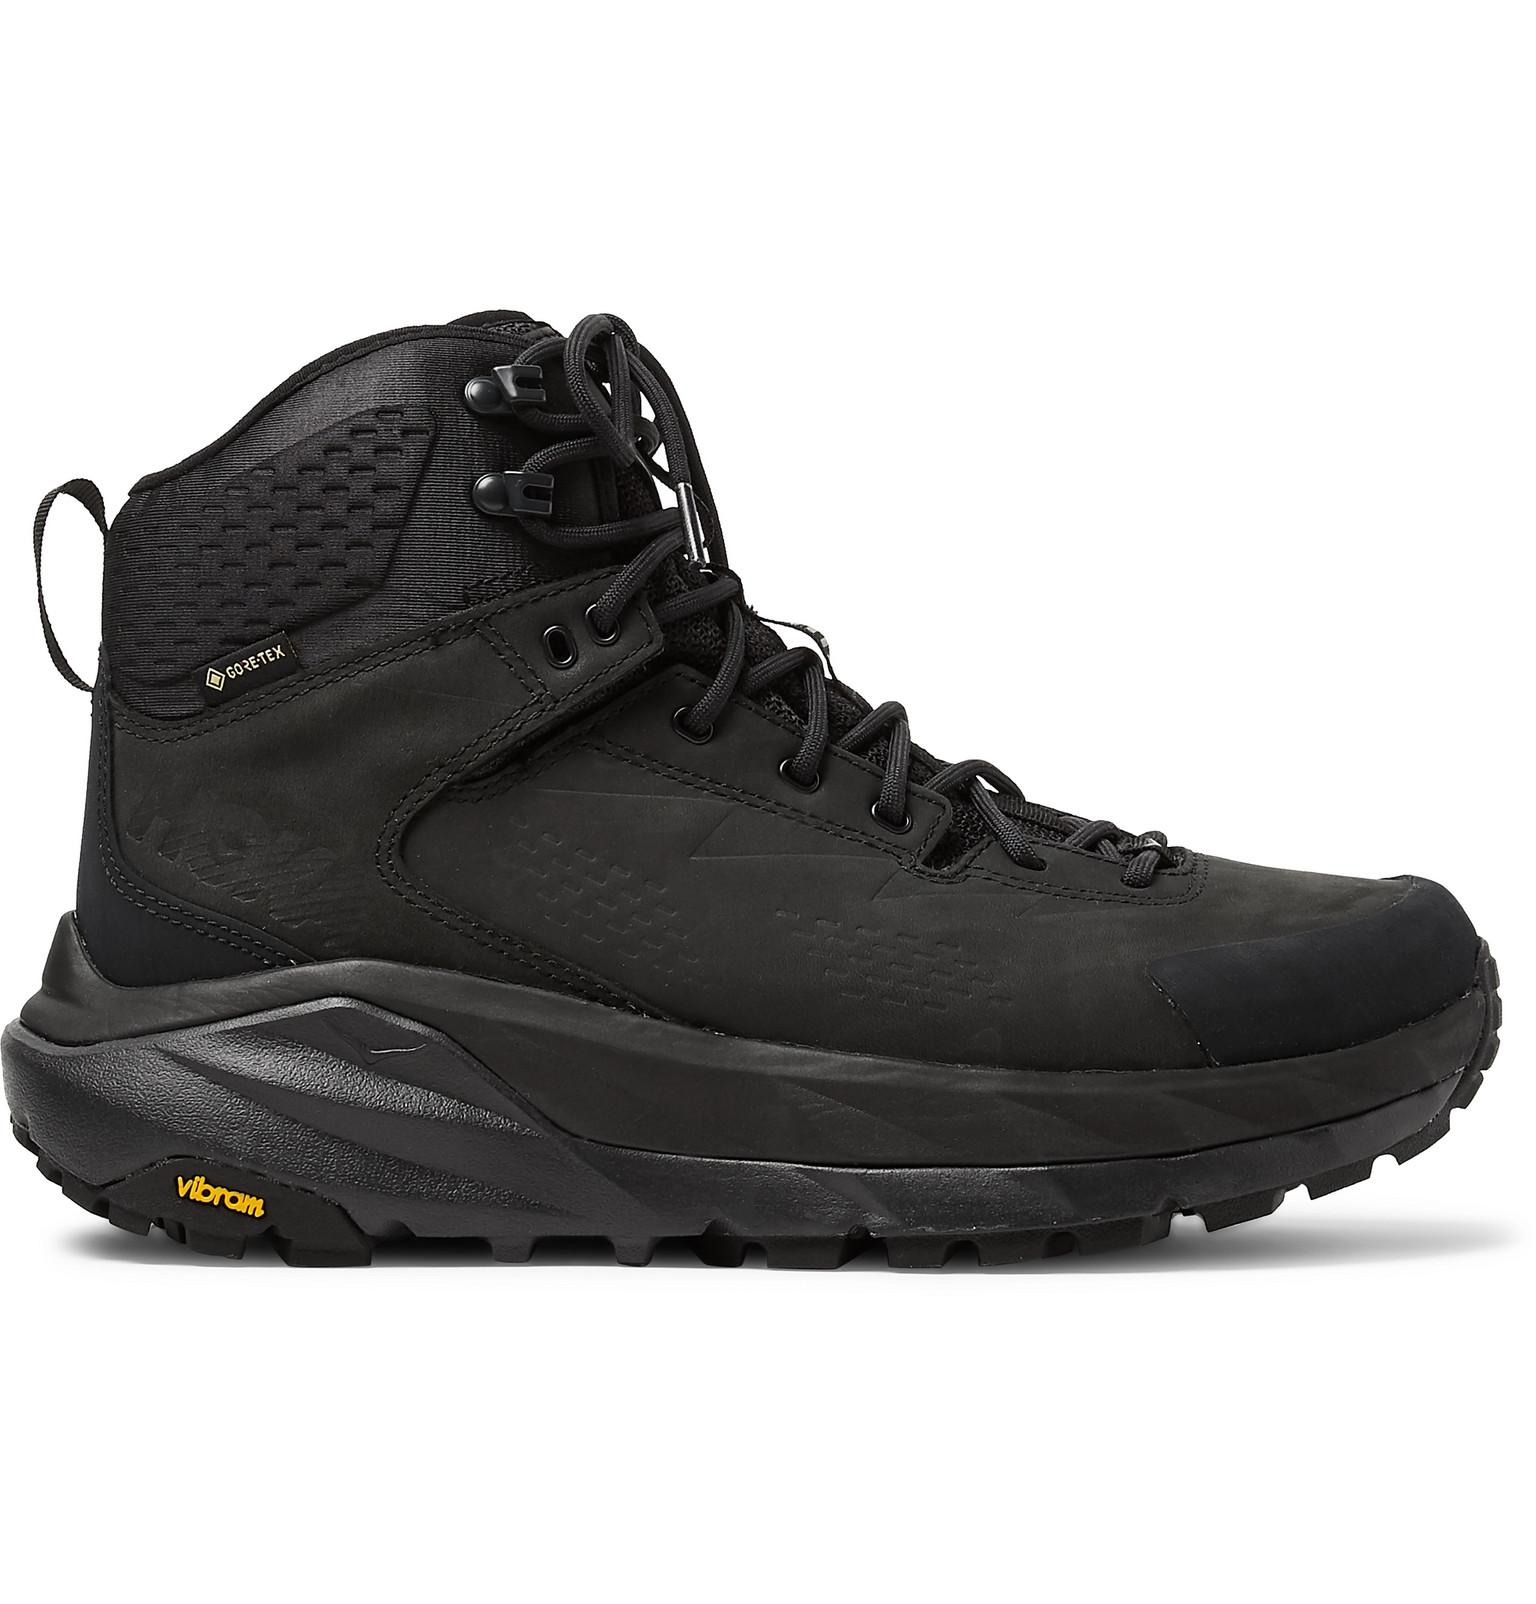 Hoka One One Kaha Gore-tex And Leather Boots in Black for Men - Lyst